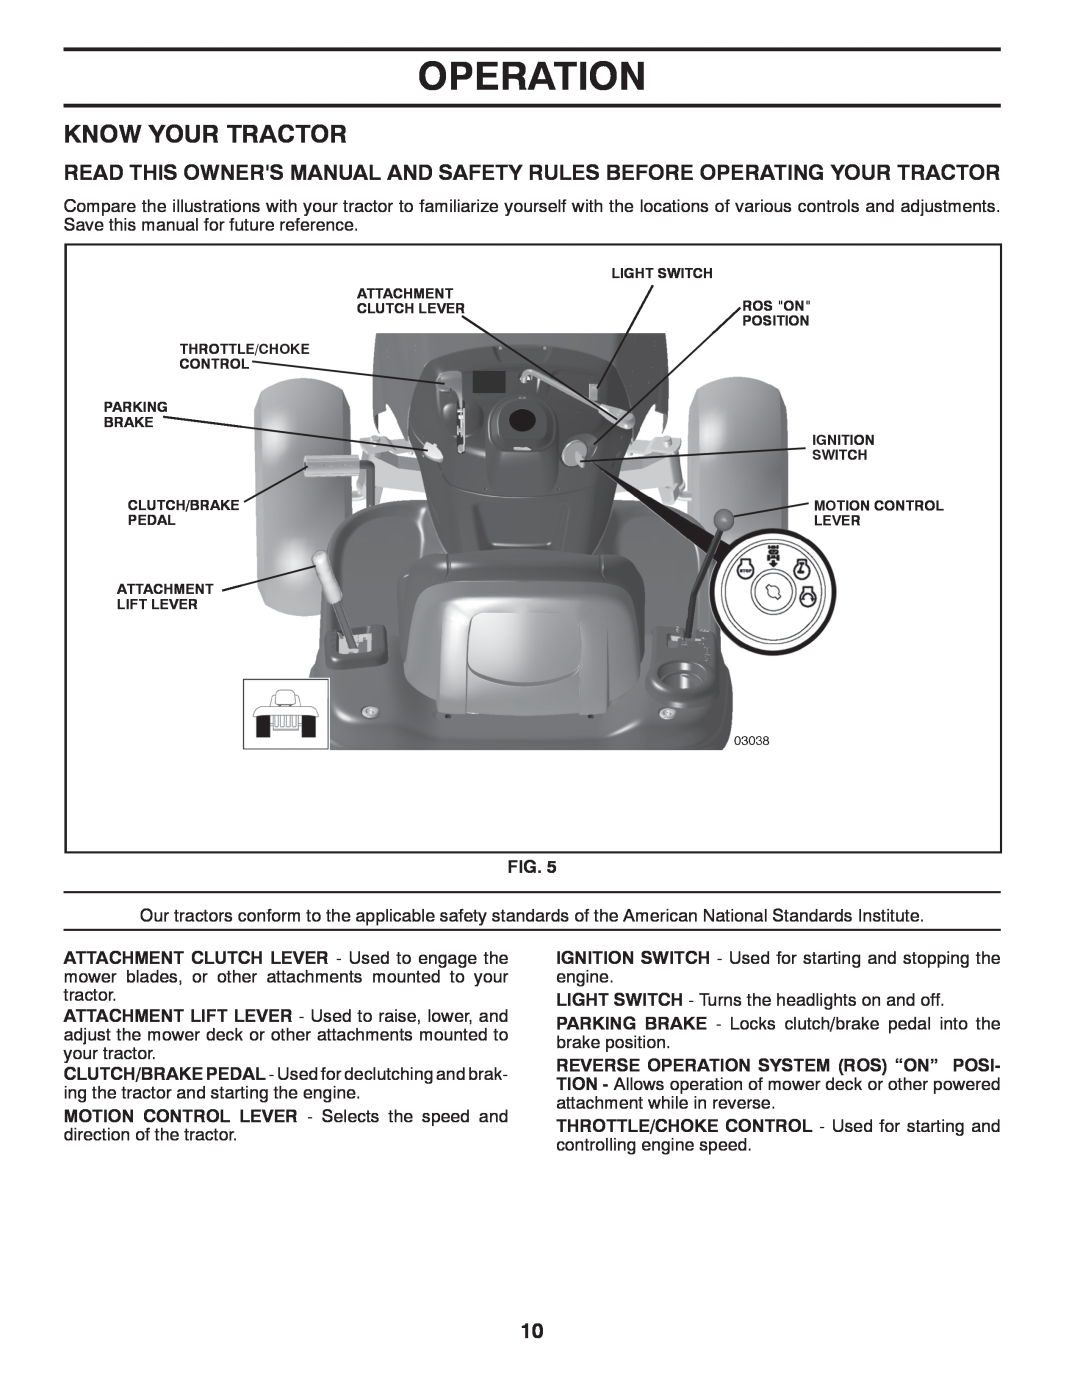 Poulan 411287 manual Know Your Tractor, Operation 